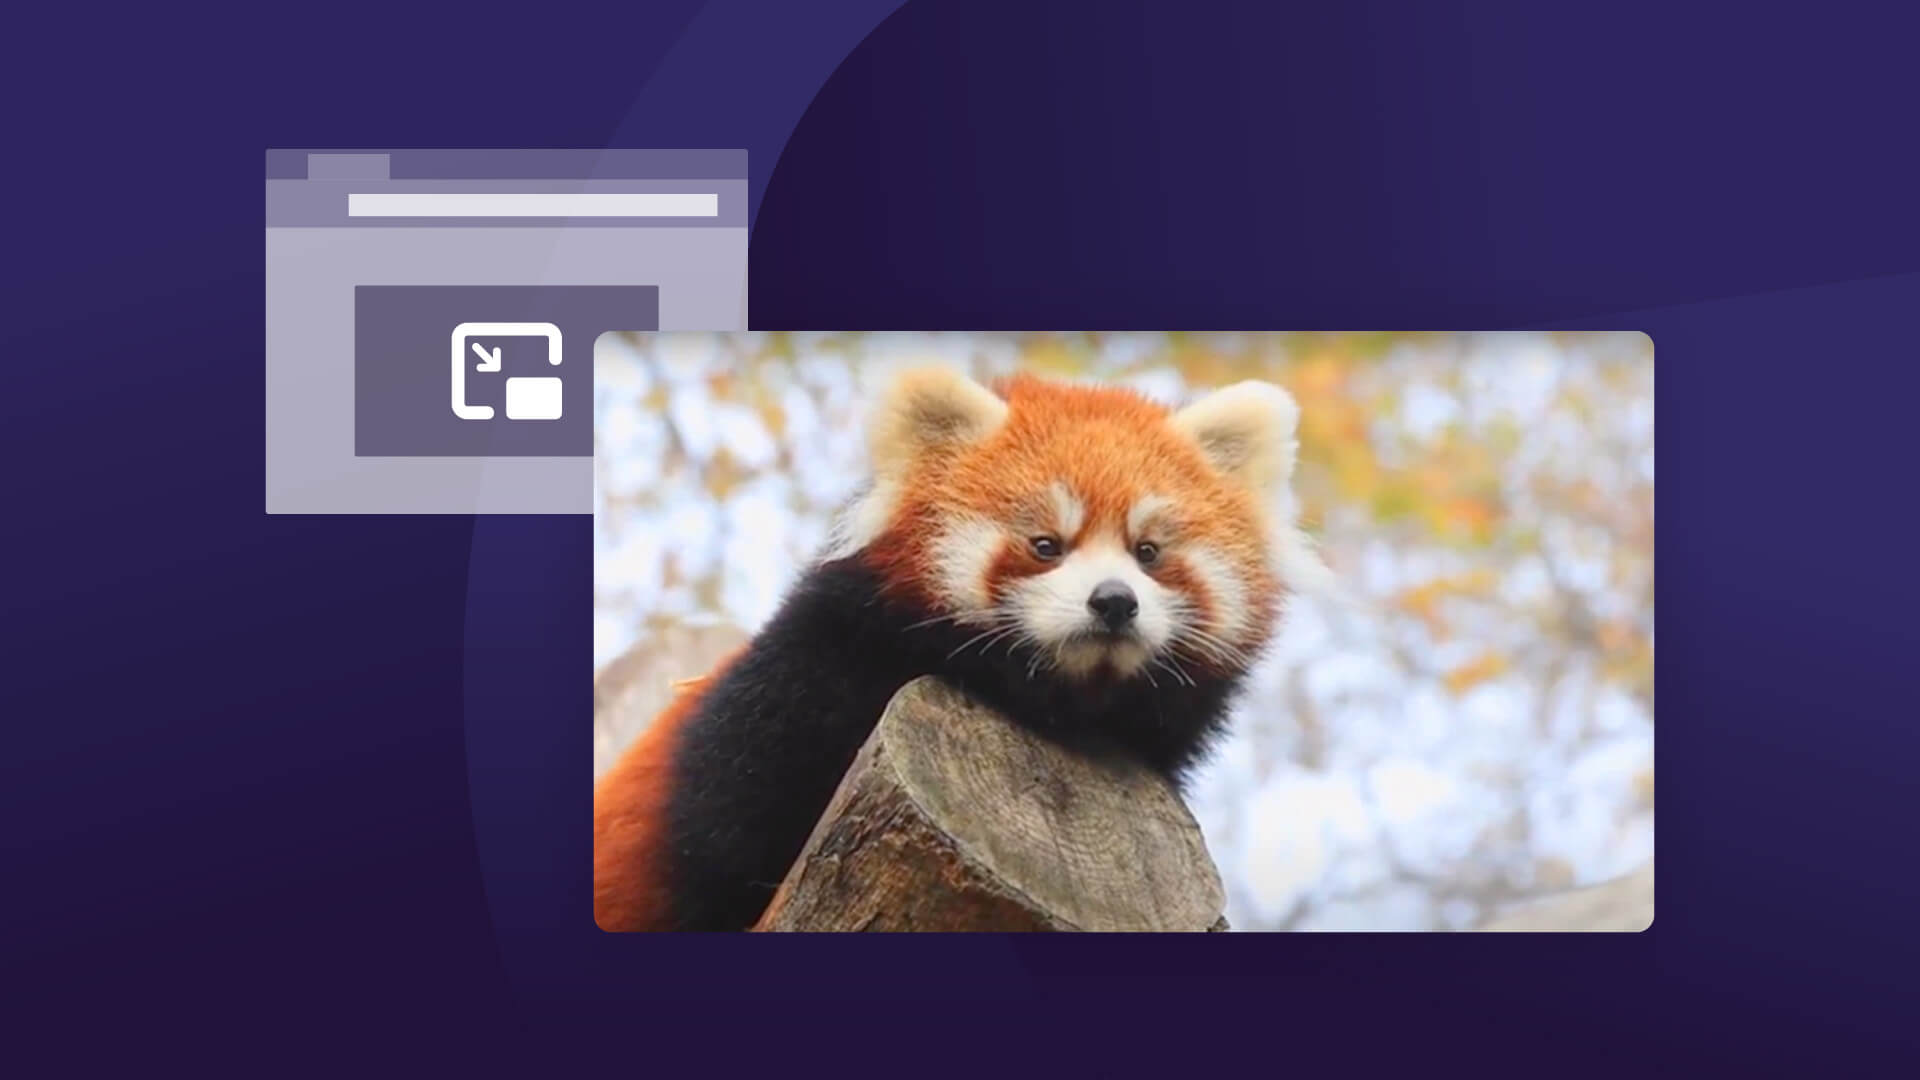 Firefox Picture In Picture Get More Done With Pop Out Videos